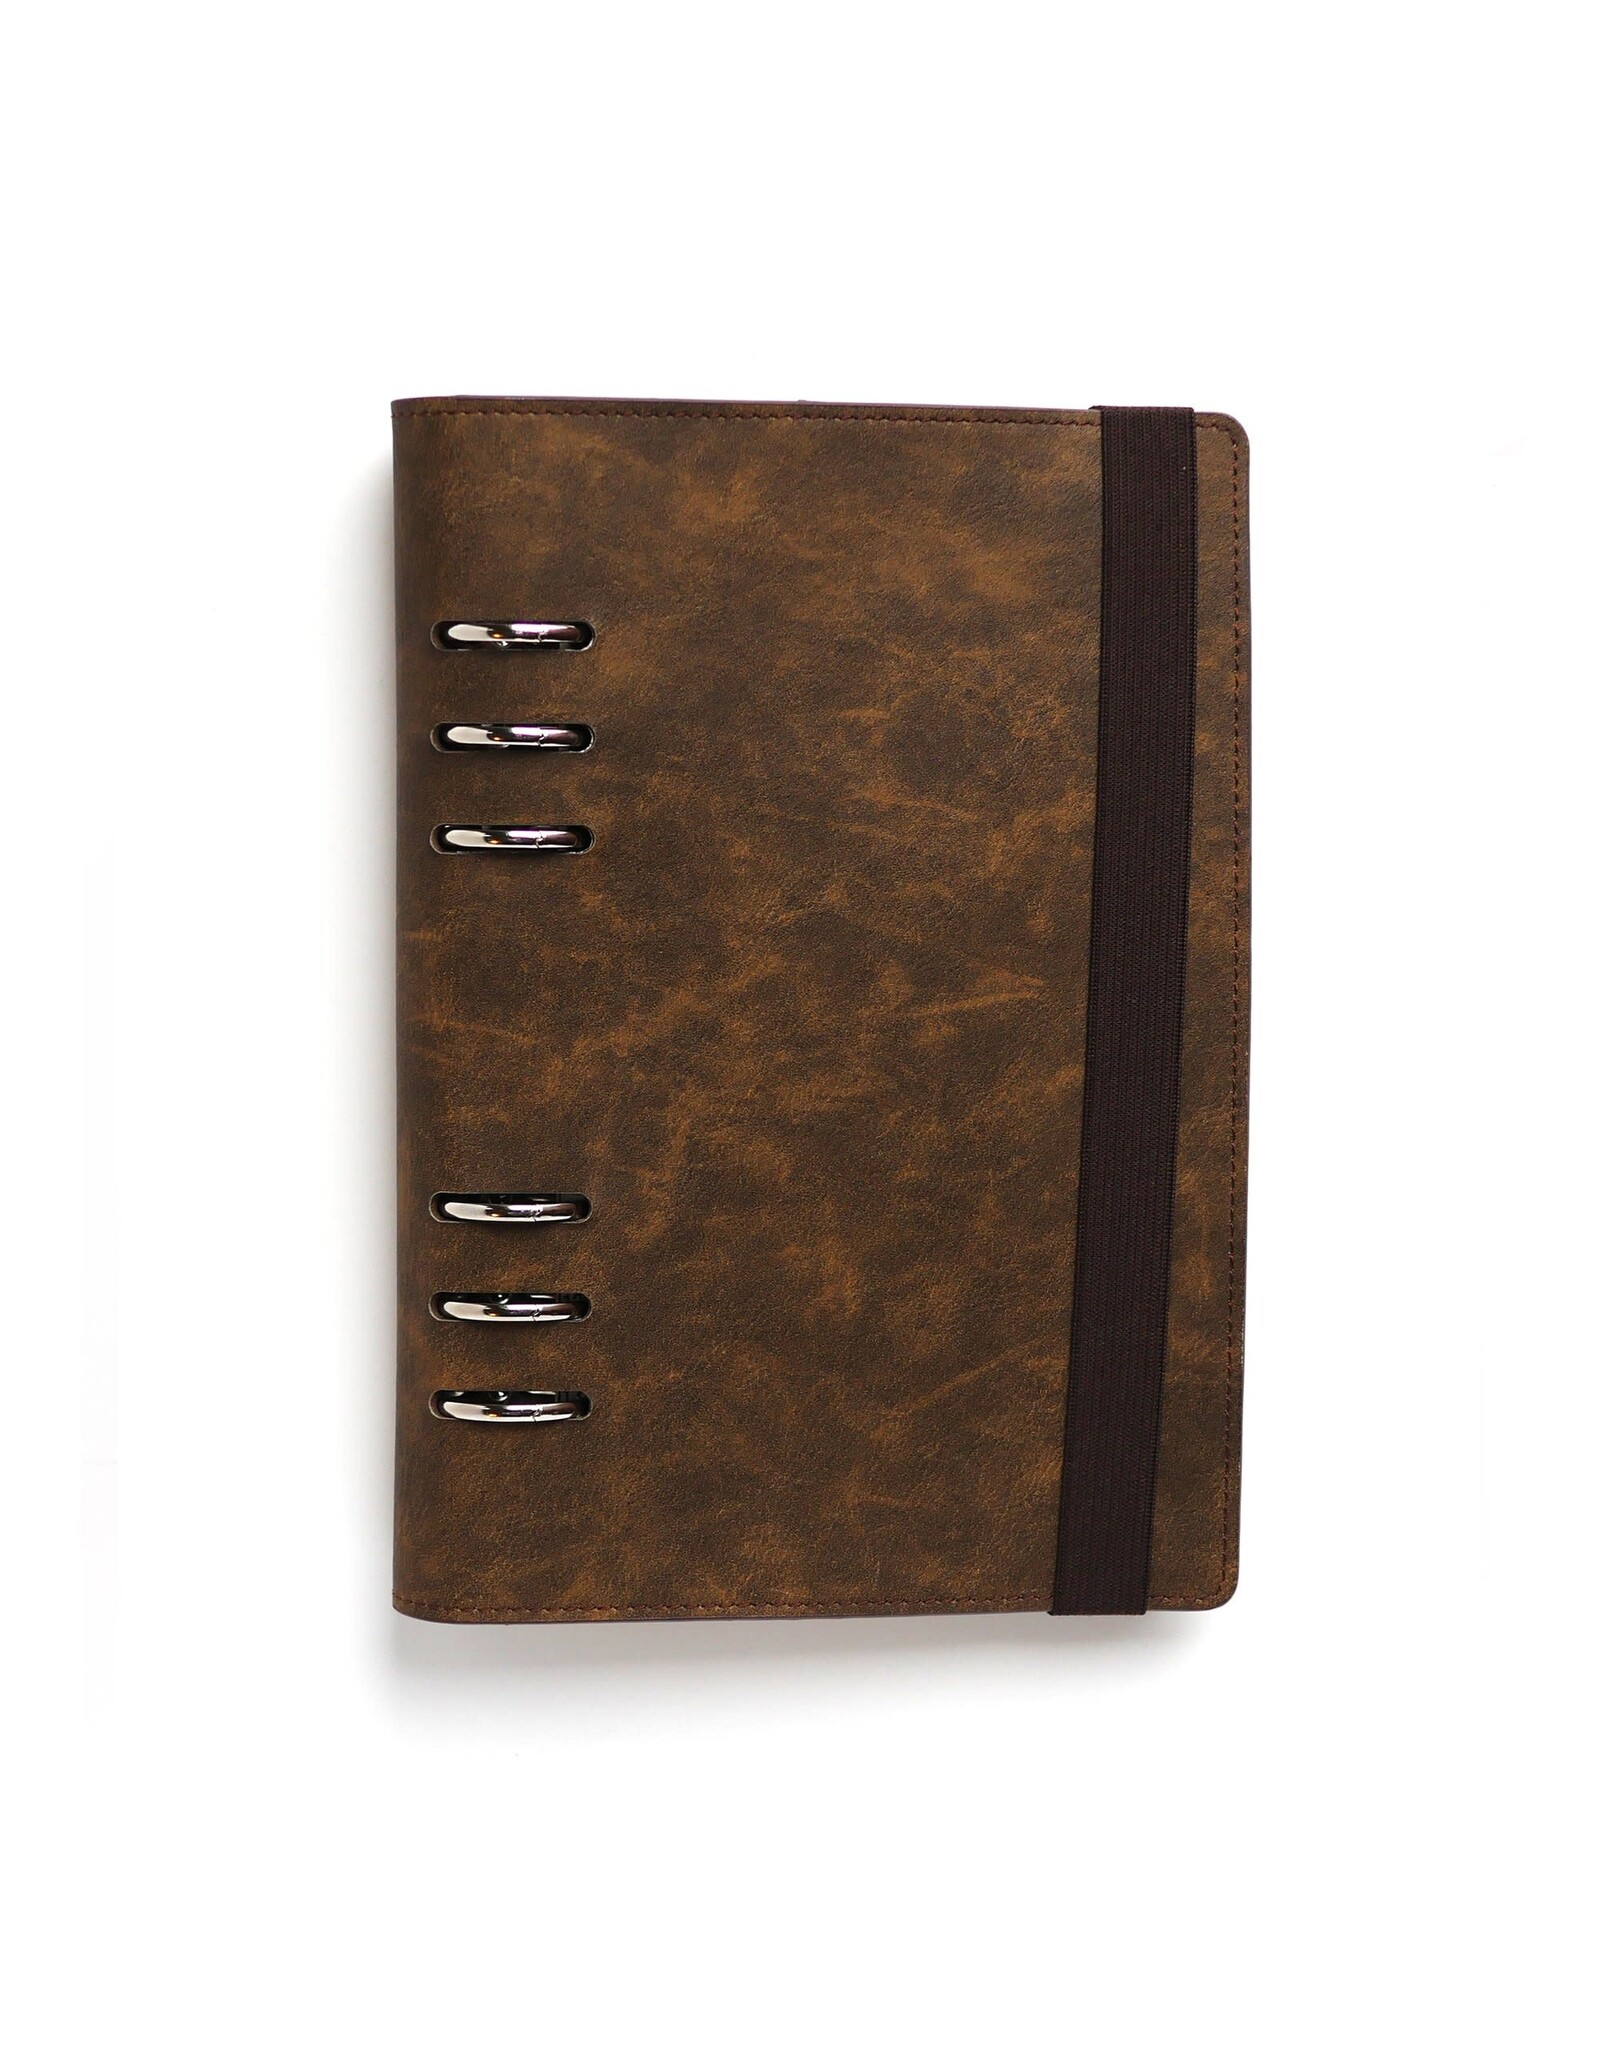 ELIZABETH CRAFT DESIGNS ELIZABETH CRAFT DESIGNS ESPRESSO A5 LEATHER PLANNER